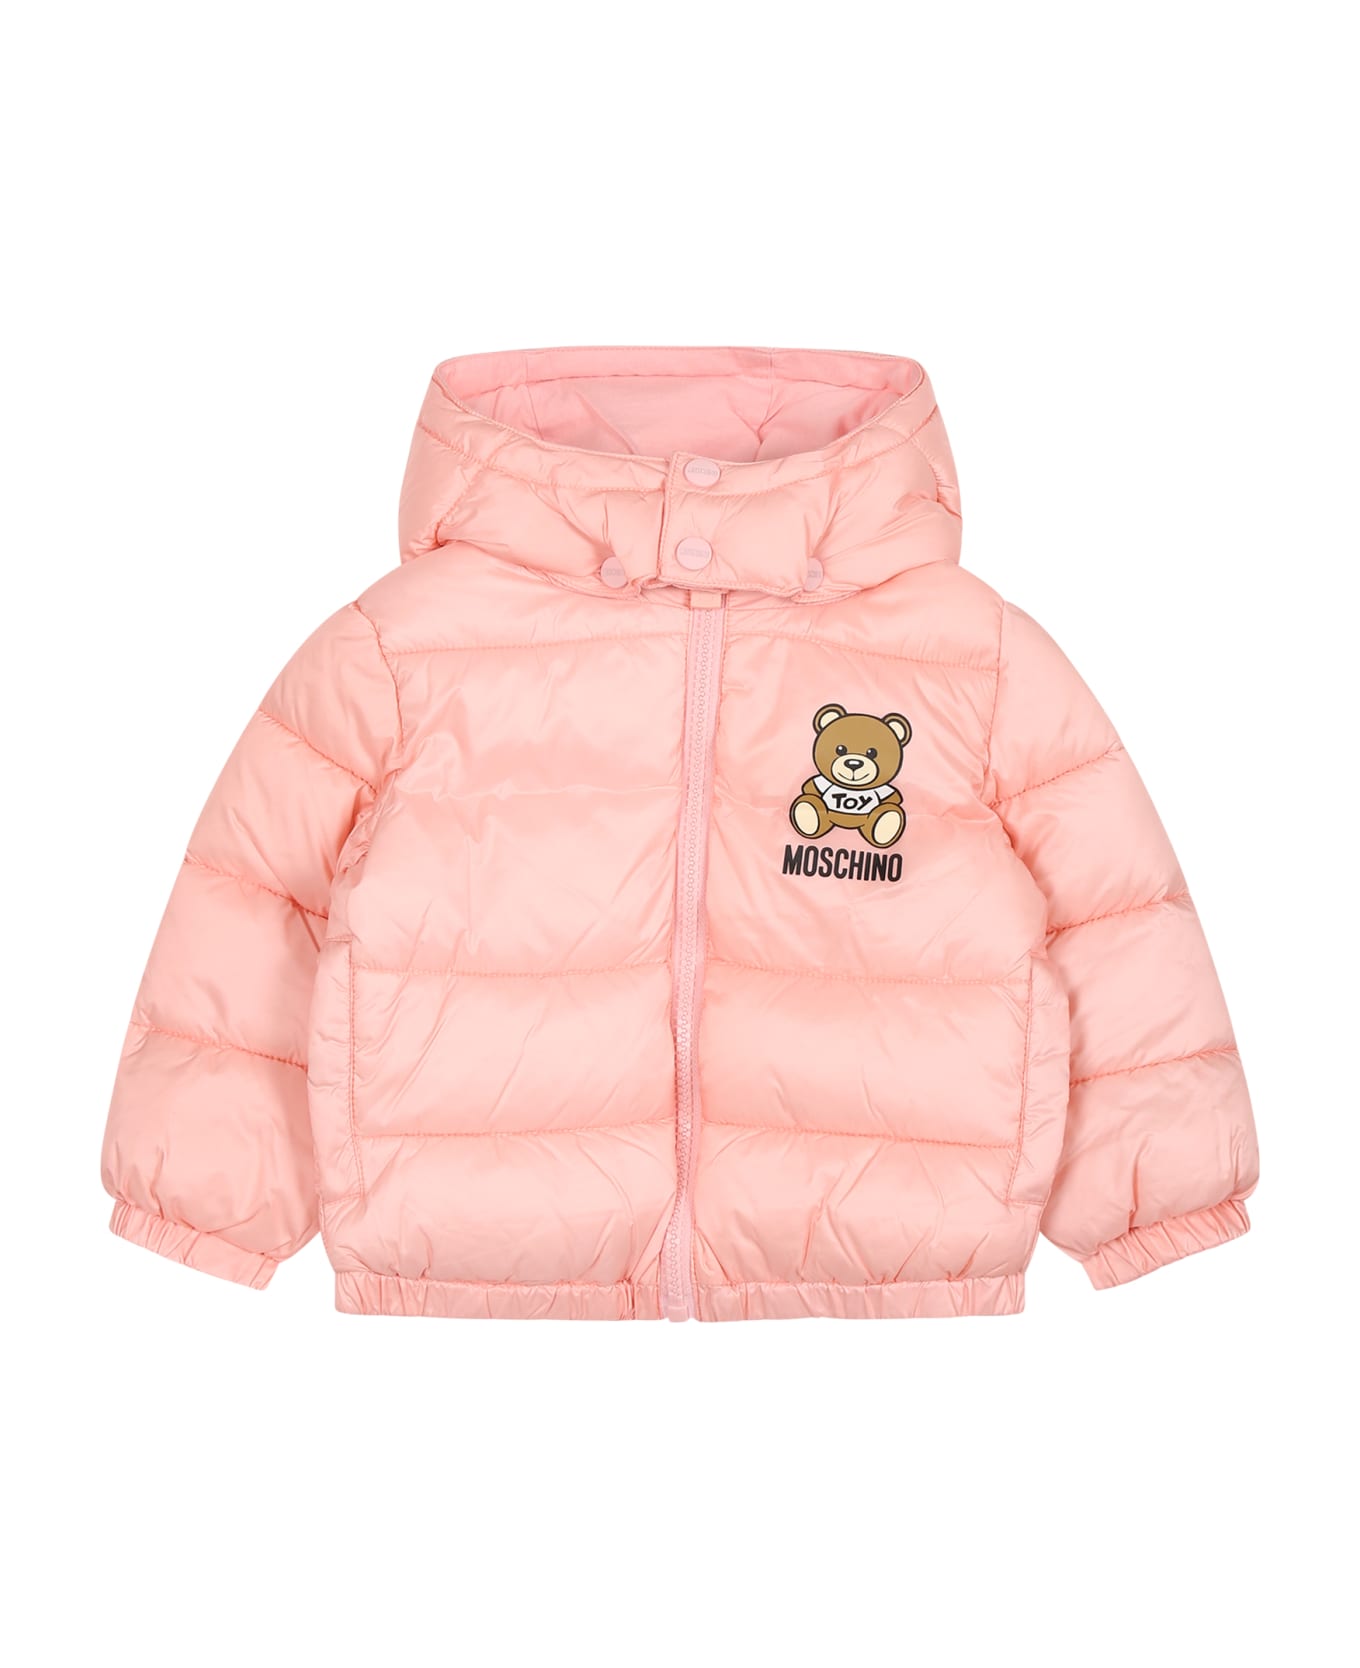 Moschino Pink Down Jacket For Baby Girl With Teddy Bear And Logo - Pink